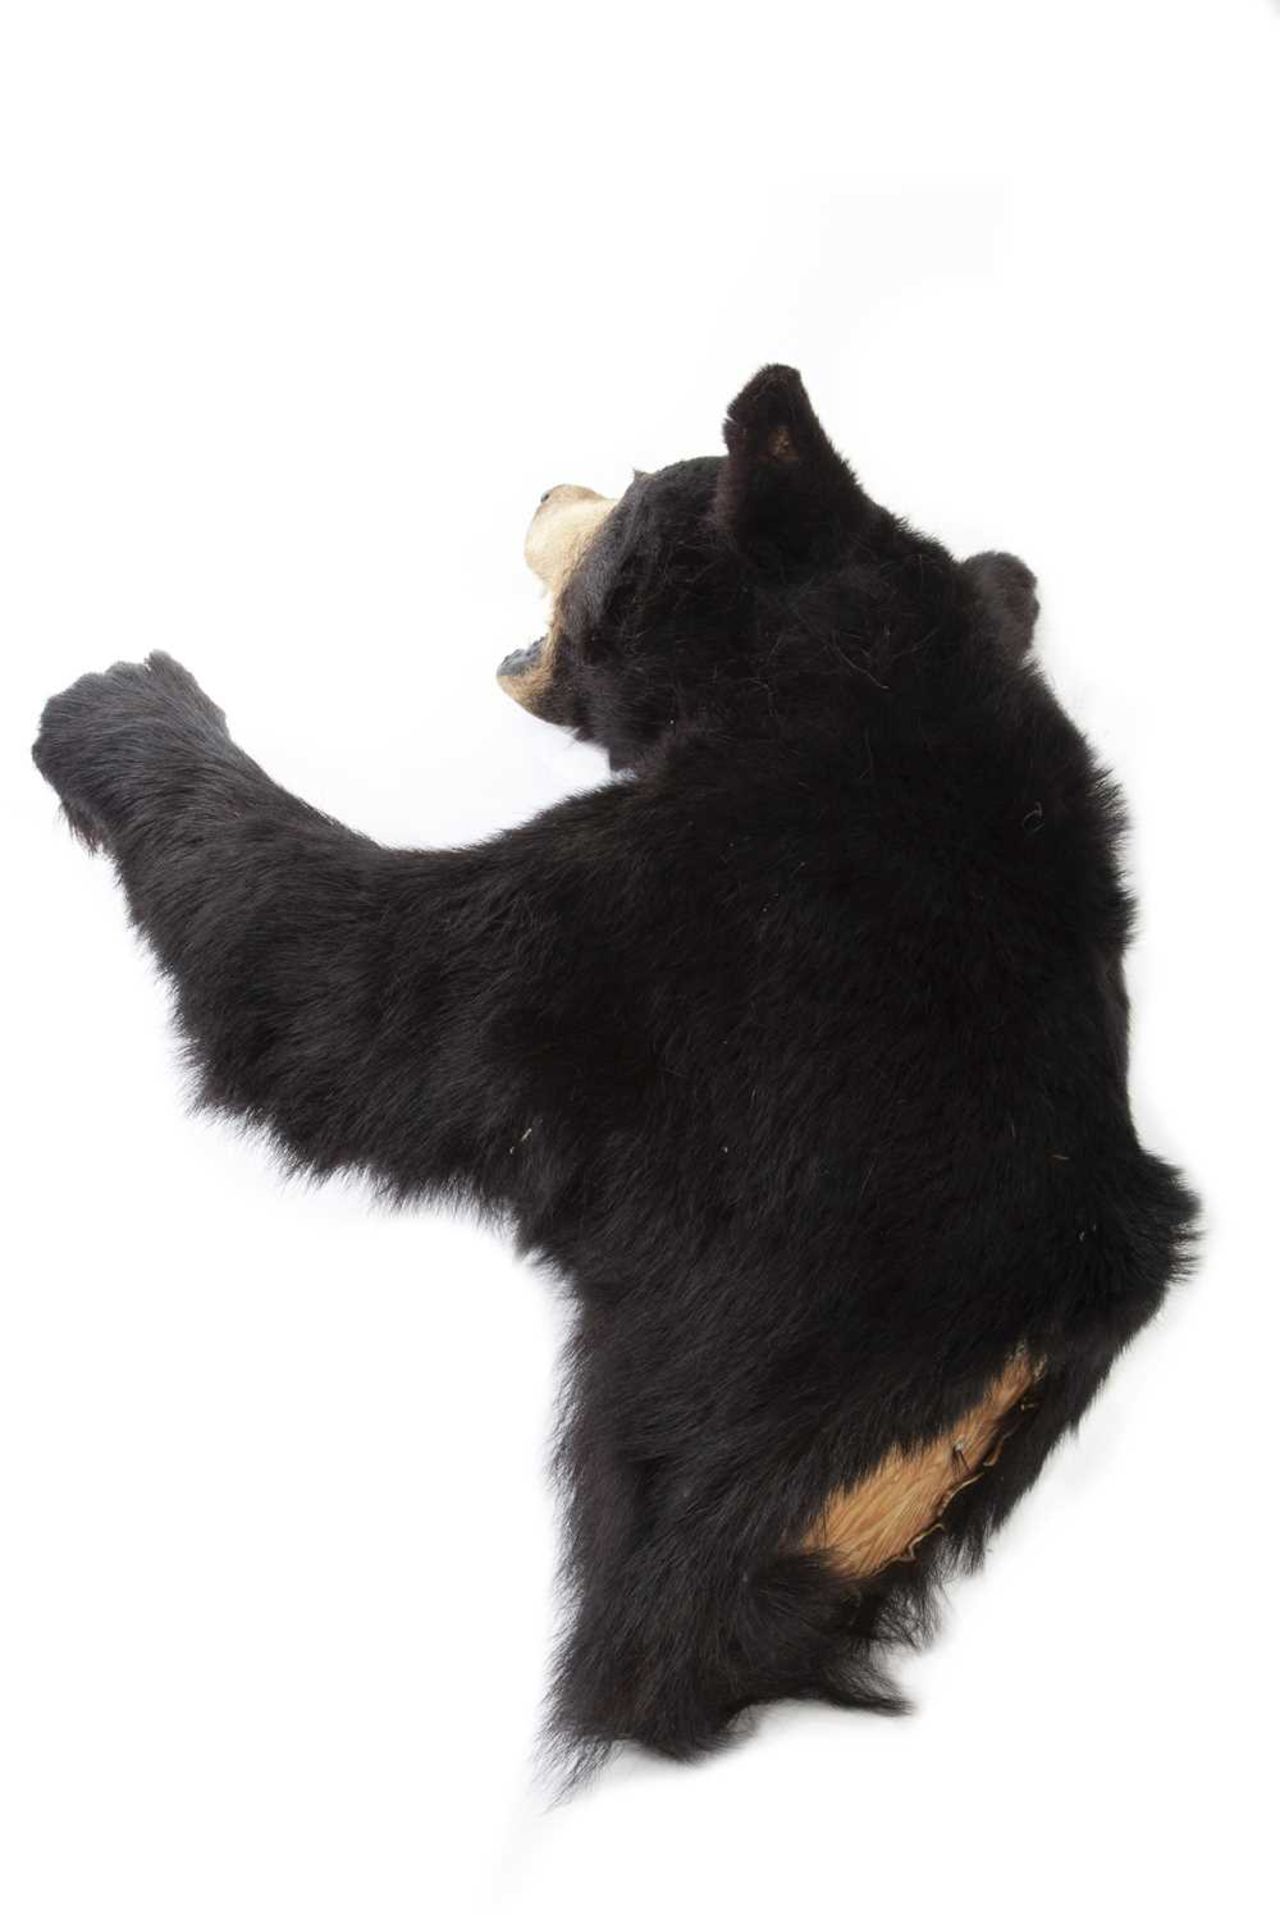 A TAXIDERMY WALL MOUNTED CANADIAN BLACK BEAR (URSUS AMERICANUS) - Image 2 of 2